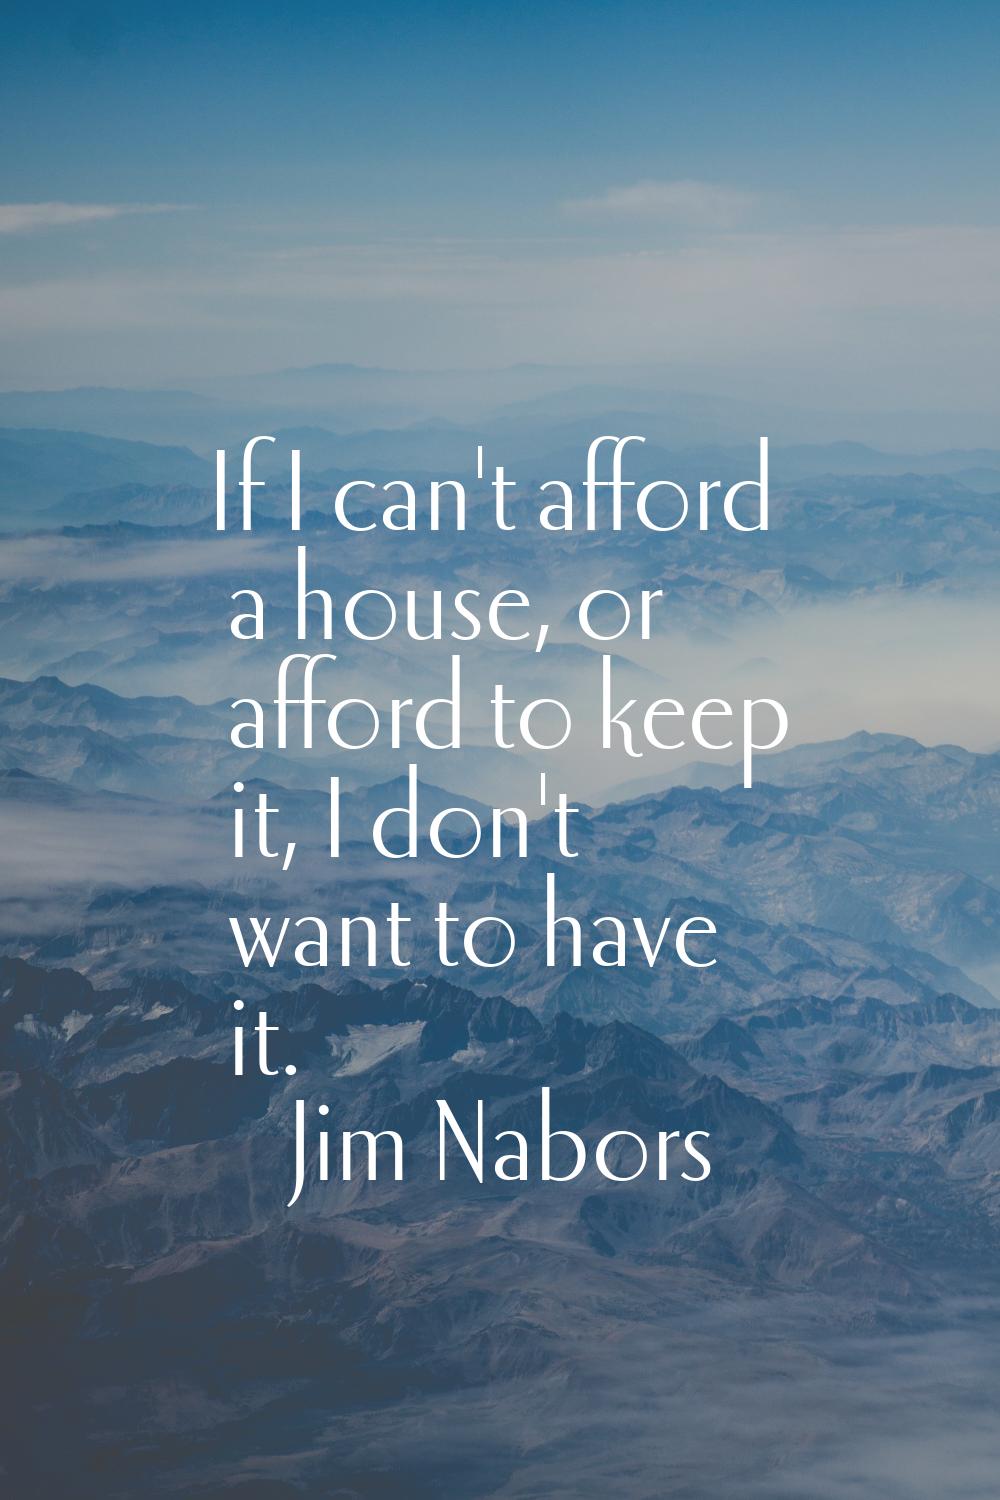 If I can't afford a house, or afford to keep it, I don't want to have it.